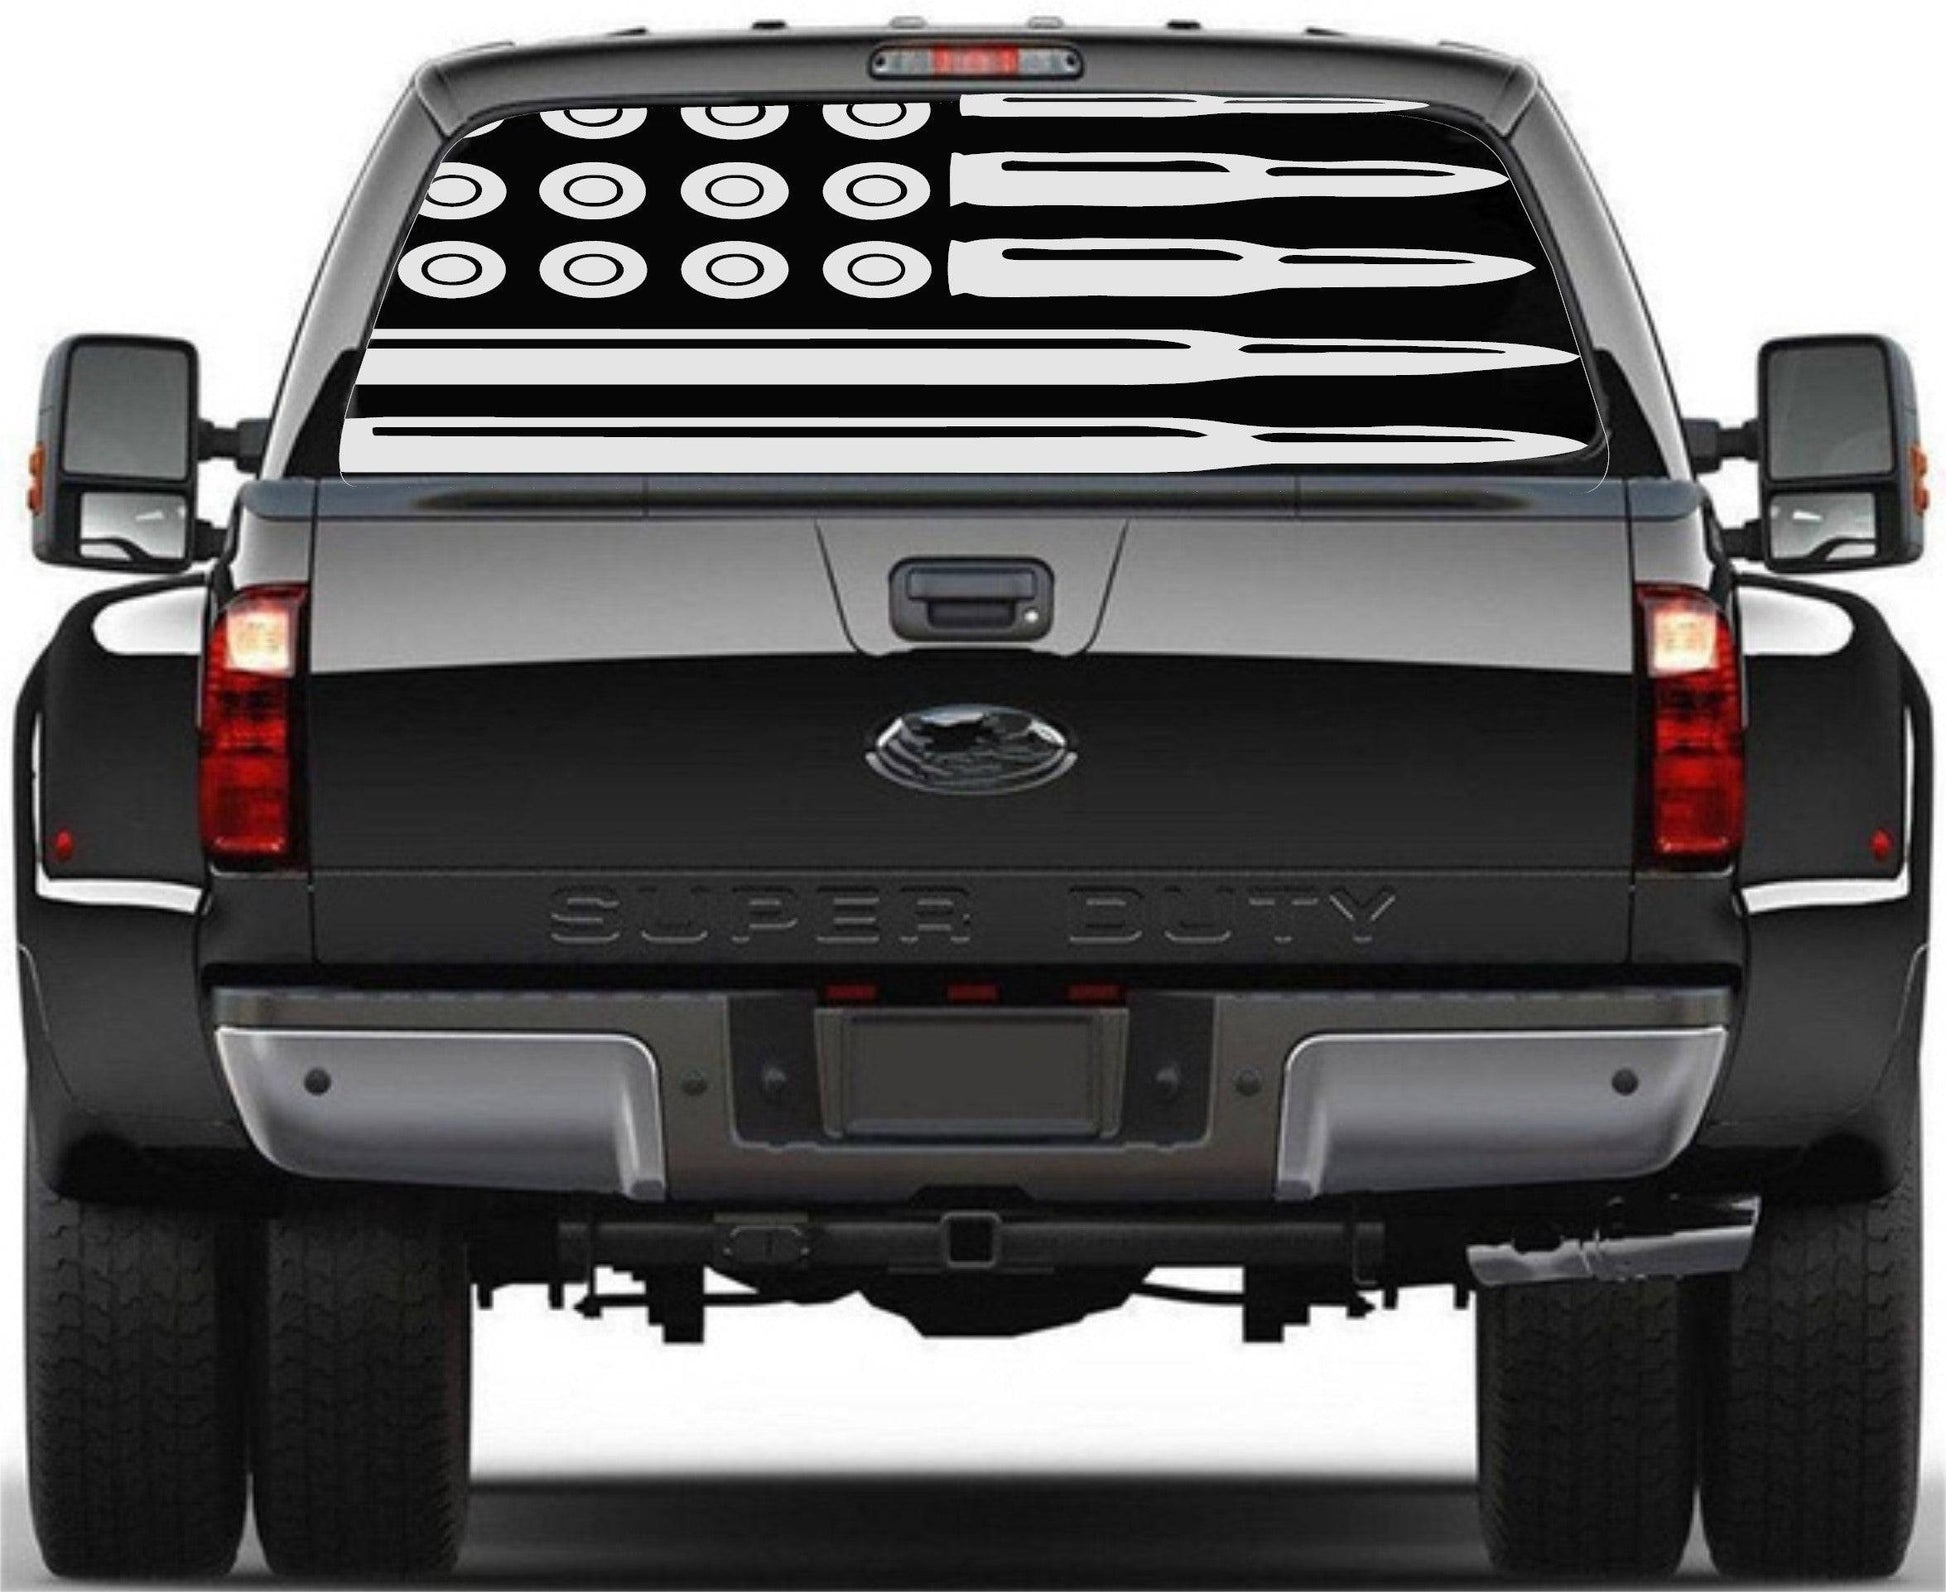 2nd Amendment Rights Gun Rights American Flag Decal Stickers Patriotic Vinyl Decal Inspired Bullets for Any Trucks, SUV's Rear Window